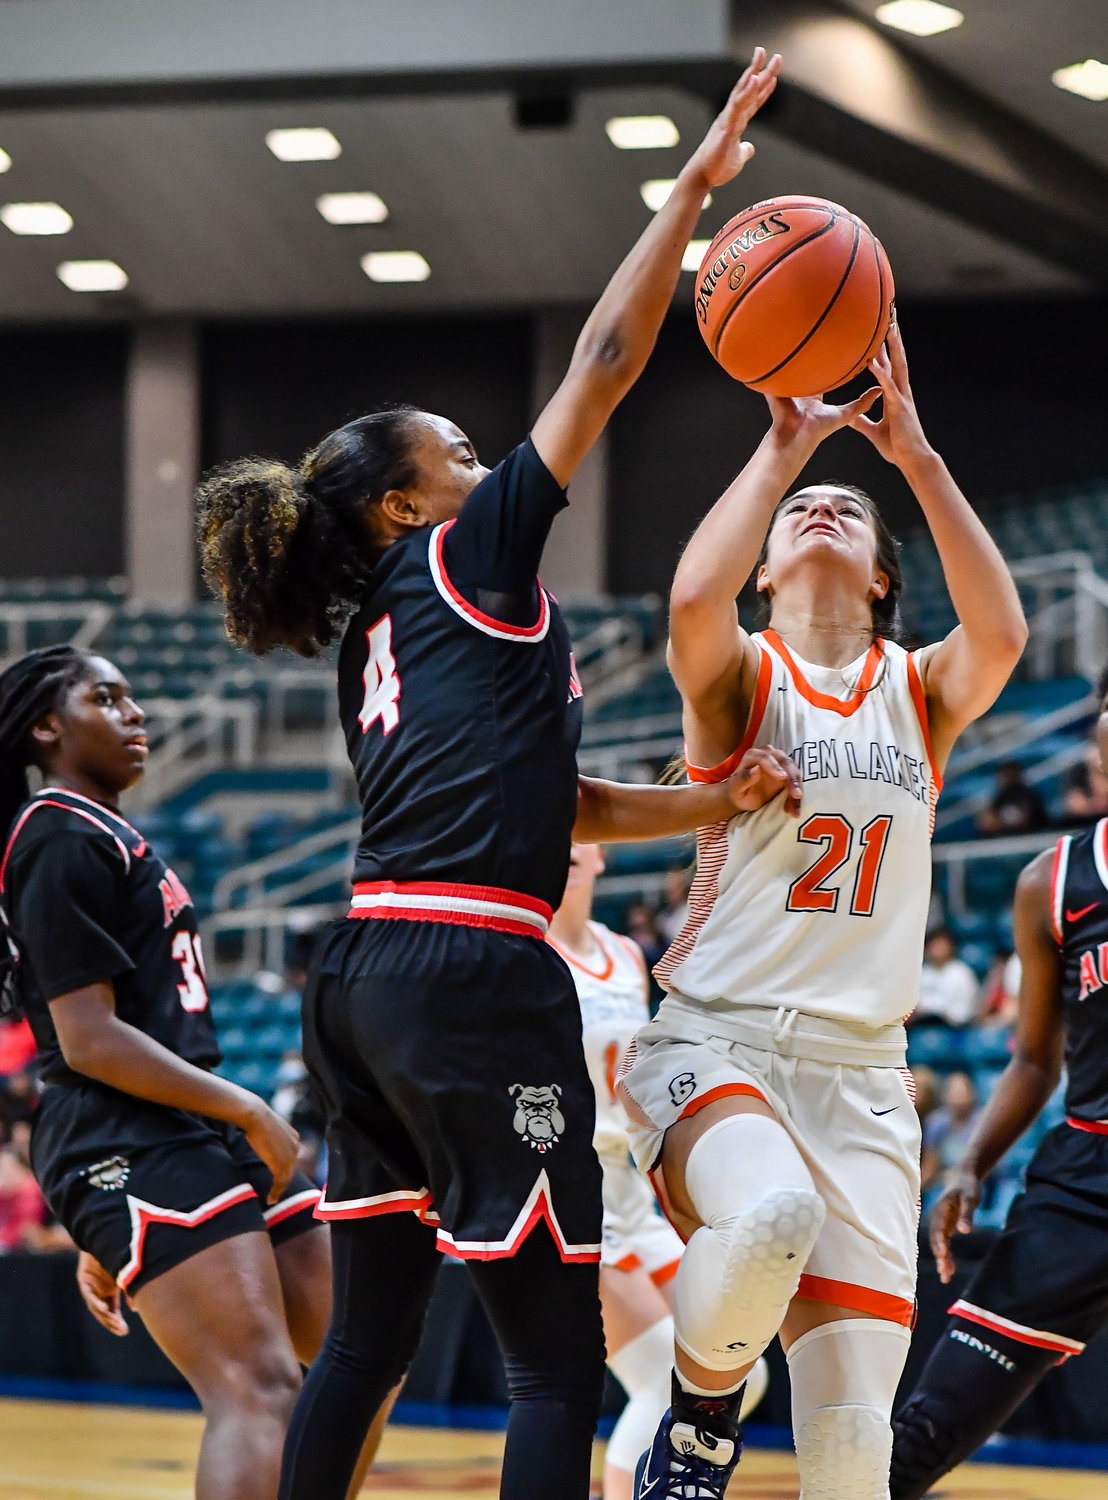 Katy Tx. Feb 22, 2022:  Seven Lakes Aliyah Atiqi #21 drives  up to the basket guarded by Fort Bend Austins Aminah Dixon #4 during the Regional Quarterfinal playoff game, Seven Lakes vs Fort Bend Austin at the Merrell Center. (Photo by Mark Goodman / Katy Times)